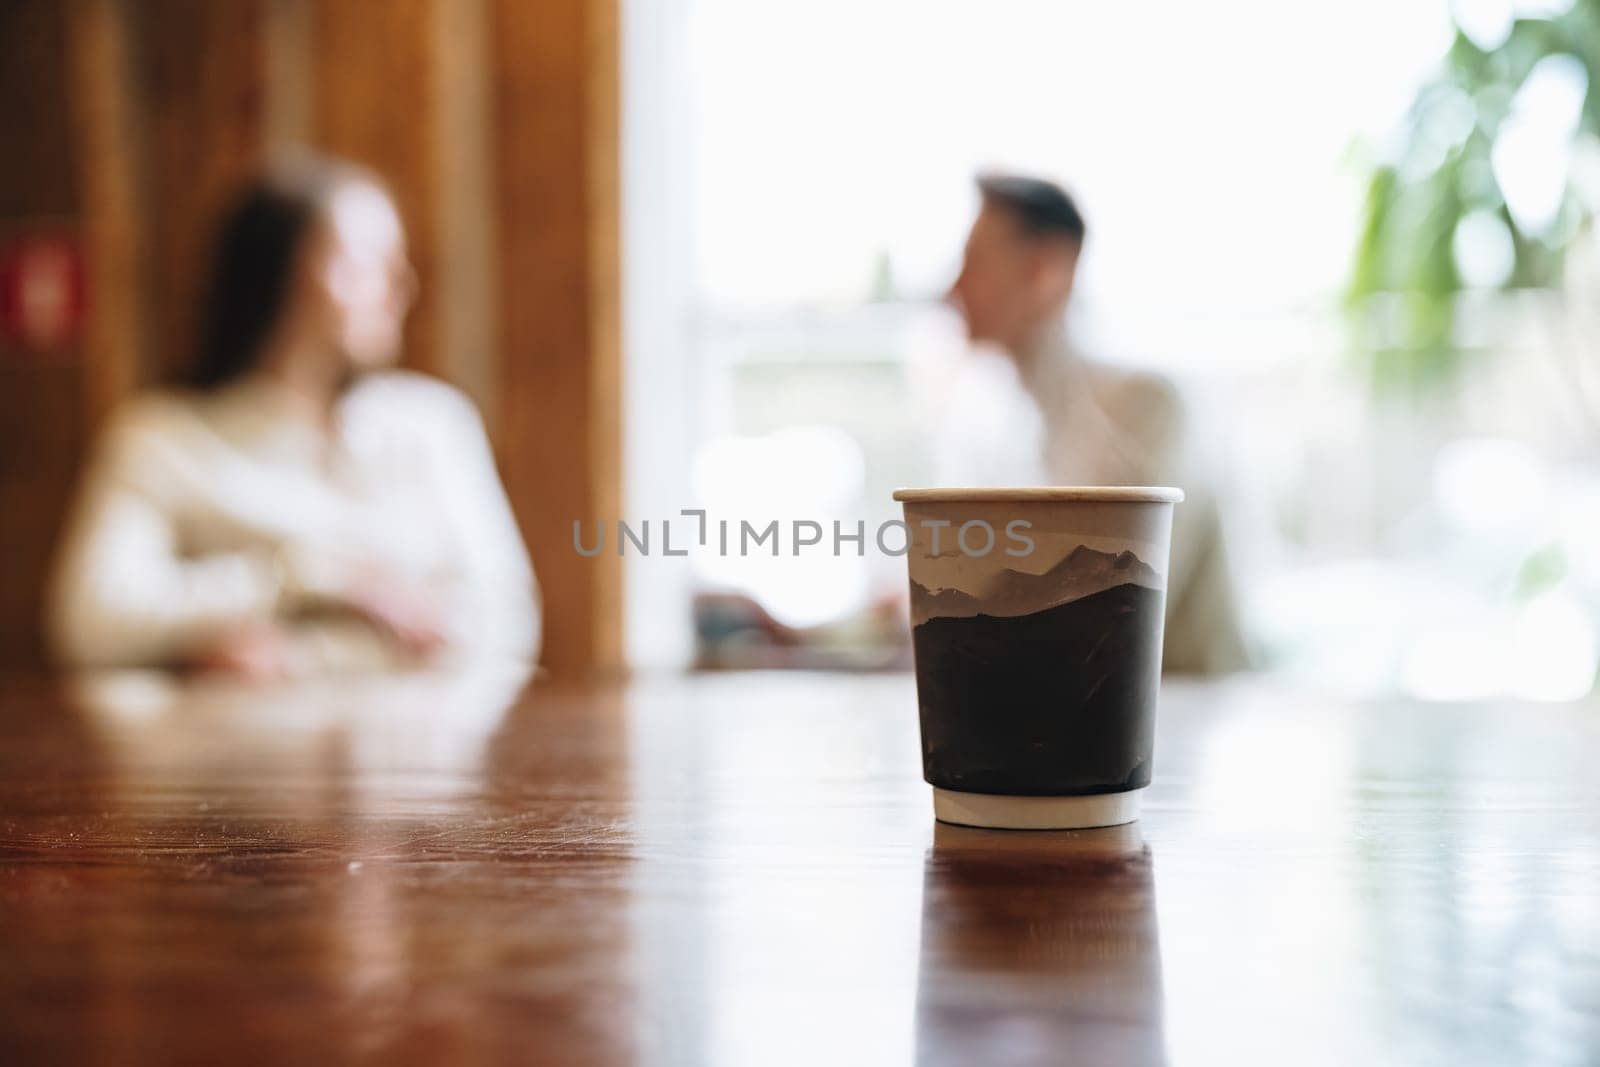 A close-up view of a coffee cup takes the center stage on a wooden table with a blurred background where two people appear to be engaging in a casual conversation in a cozy, indoor setting.